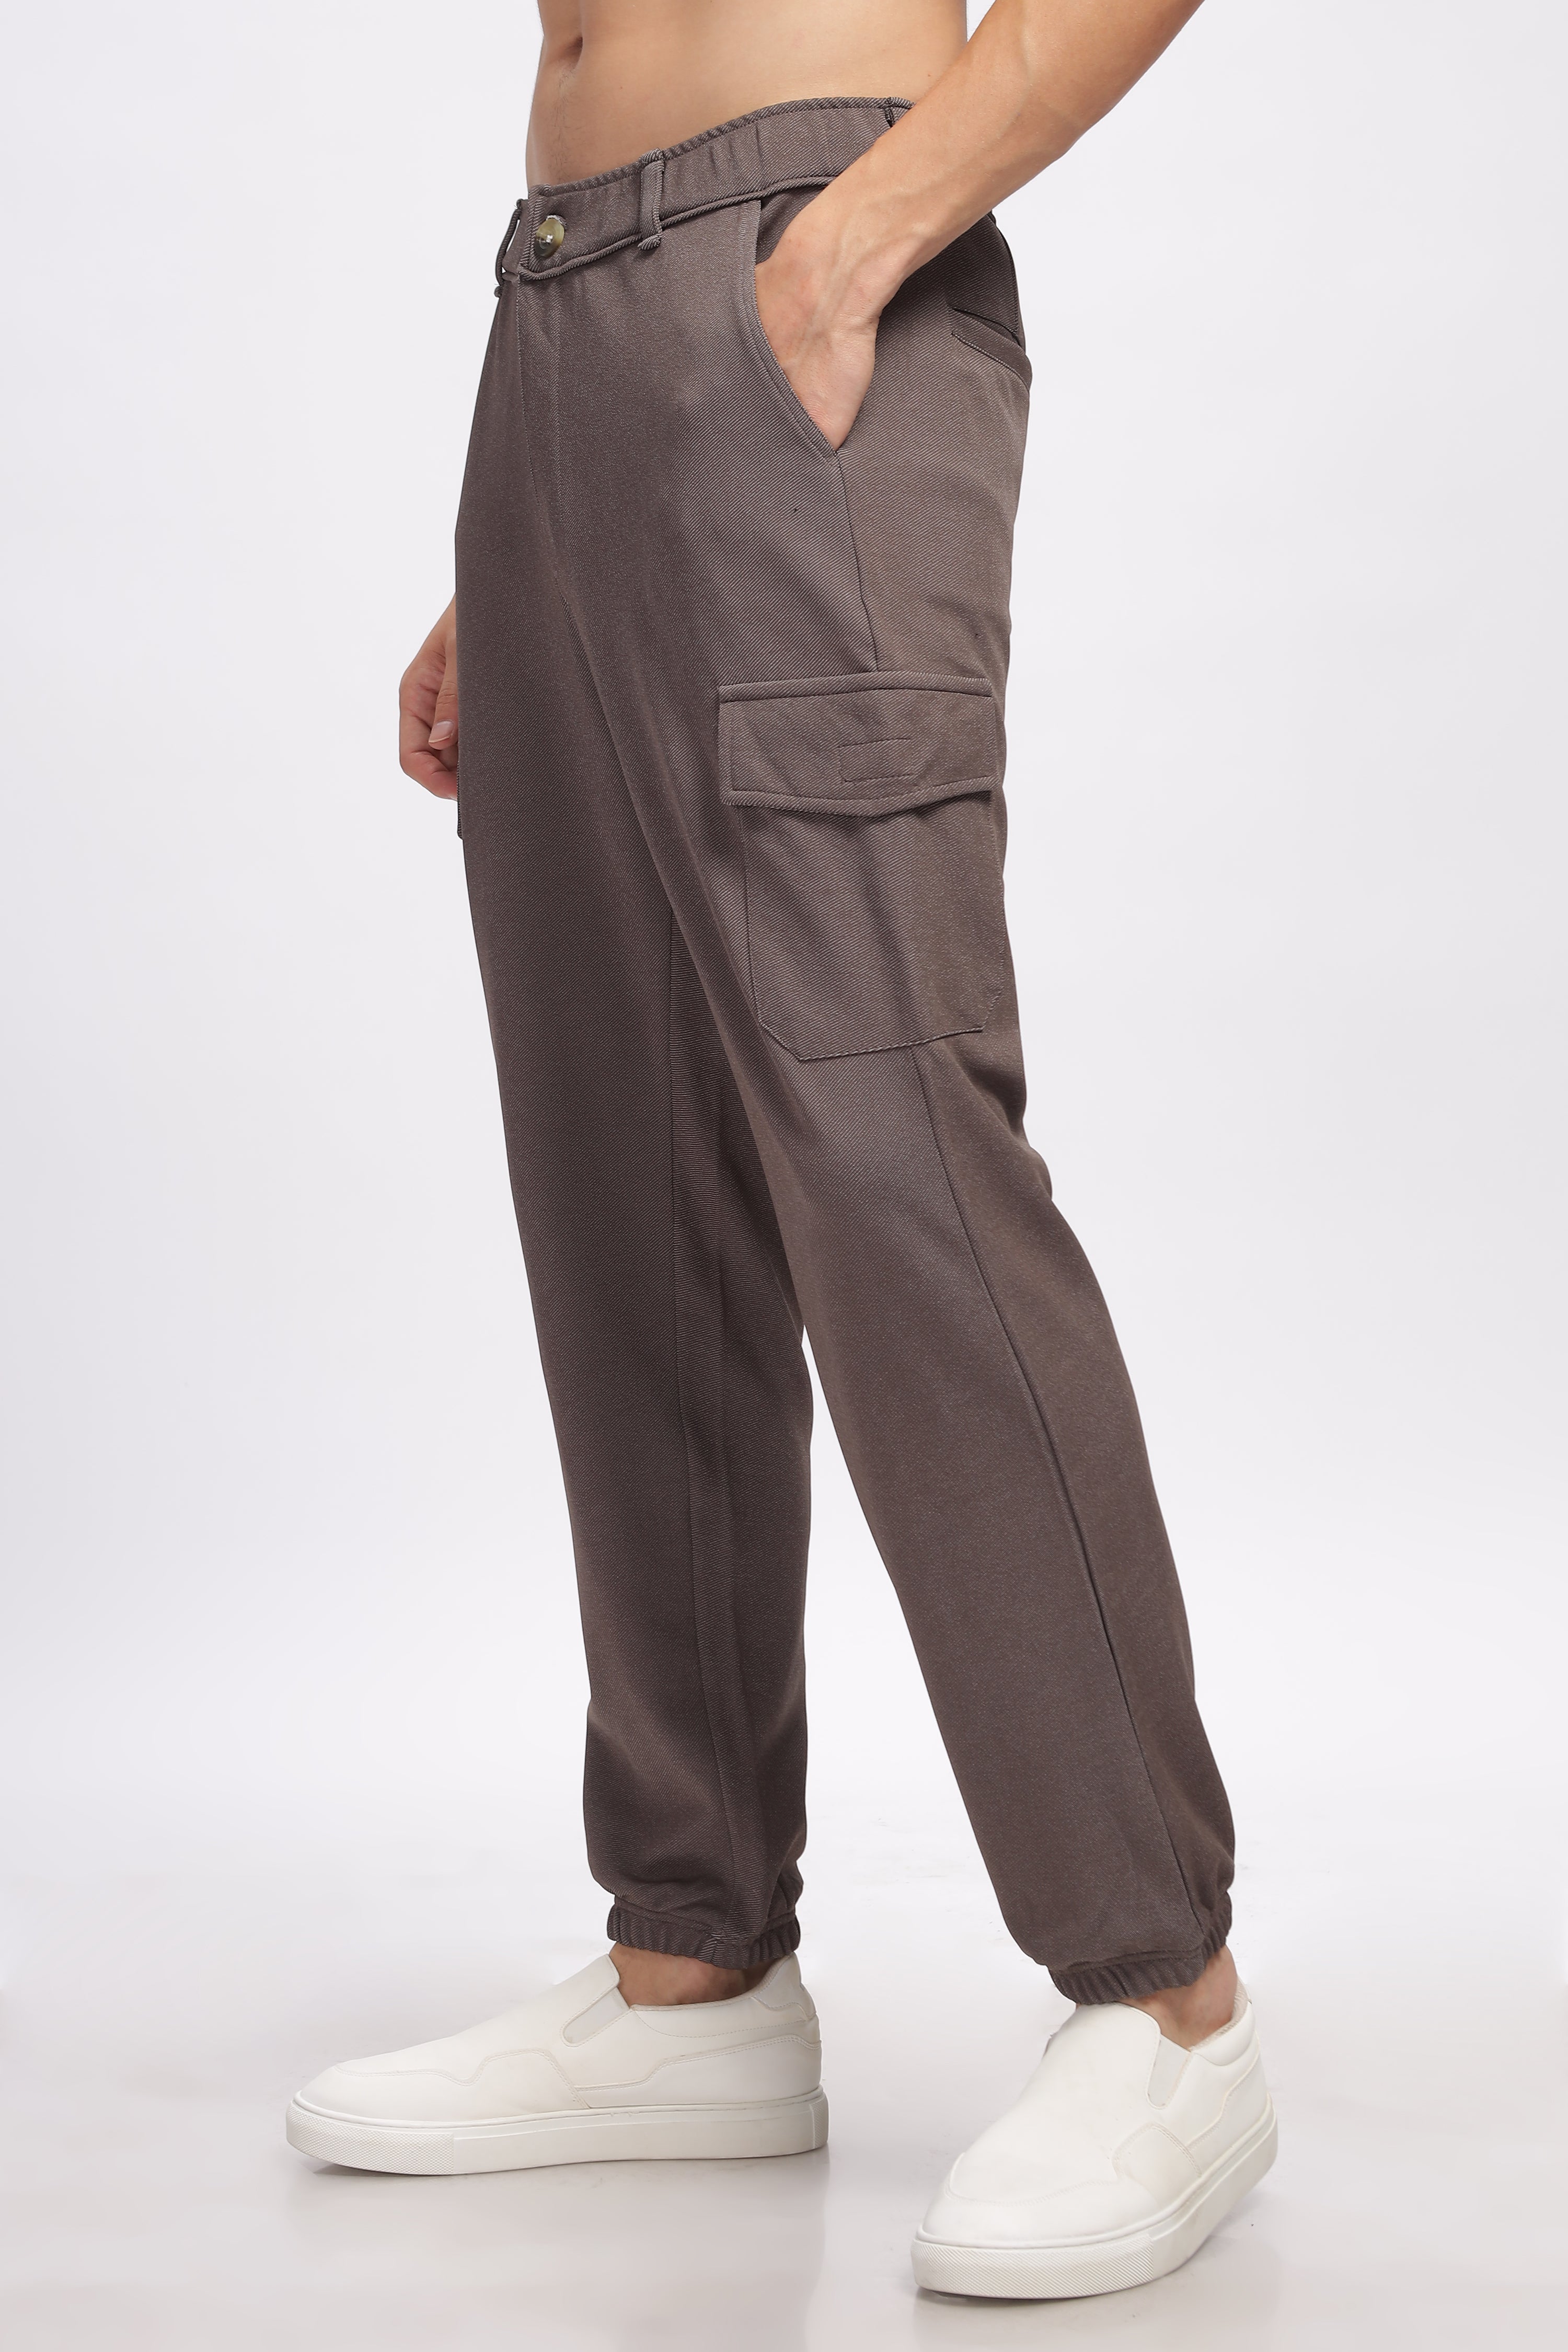 Brown Cargo Style Track Pants